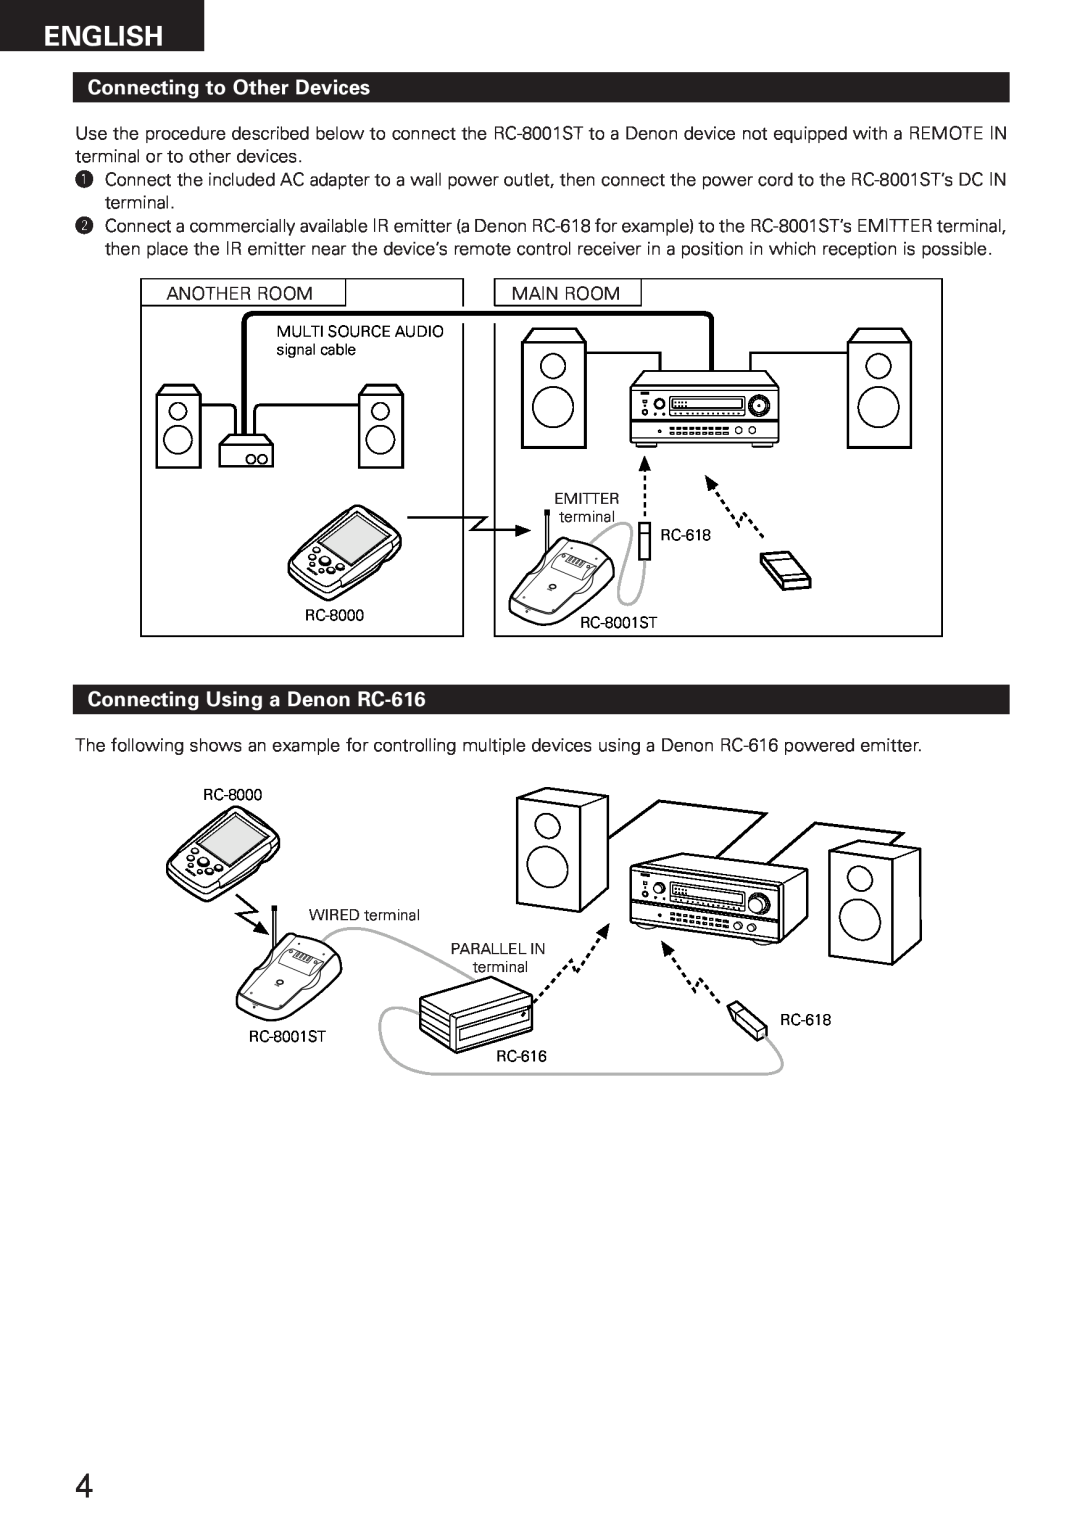 Denon RC-8000 manual Connecting to Other Devices, Connecting Using a Denon RC-616, English 